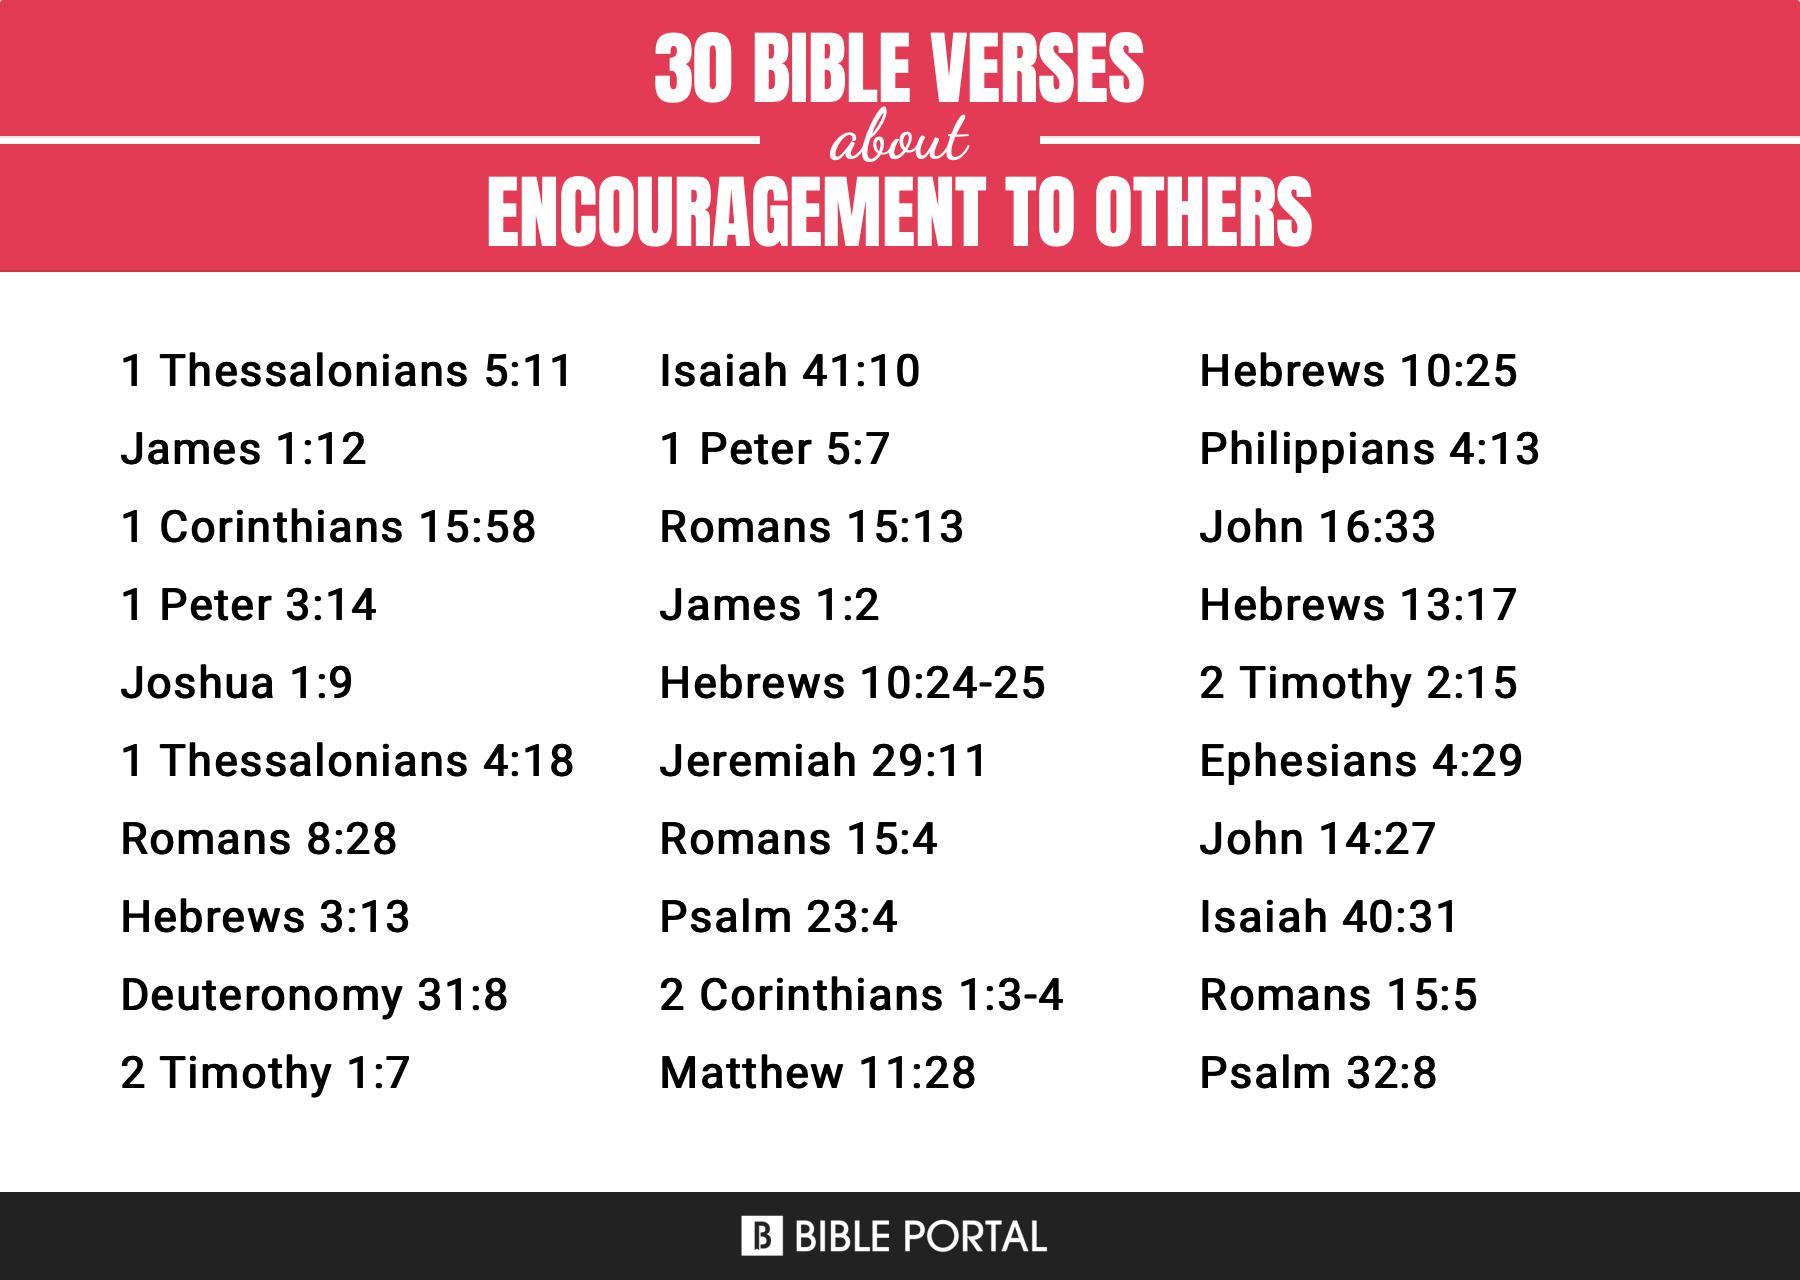 What Does the Bible Say about Encouragement To Others?